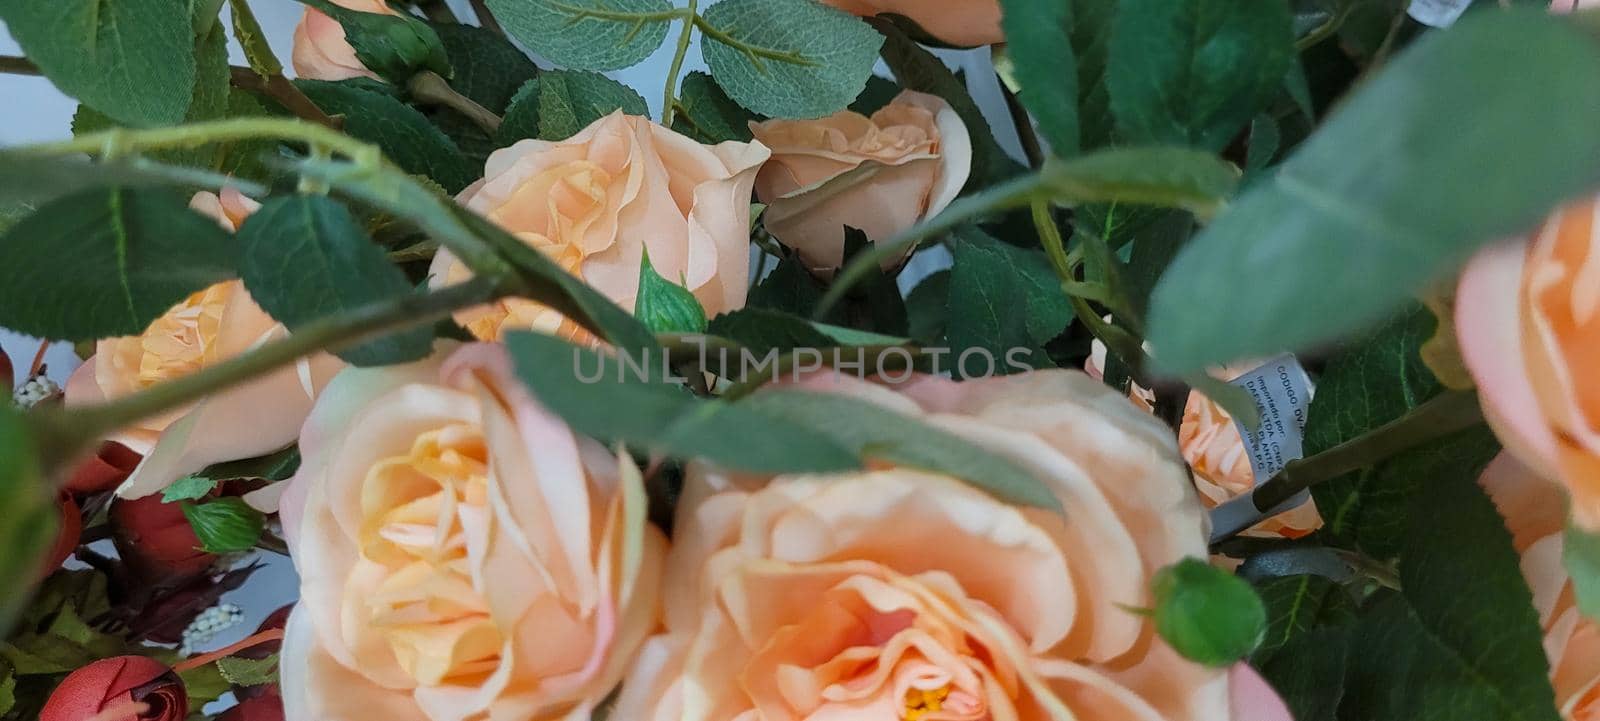 flower garden rose flowers with green leaves which can be used as background